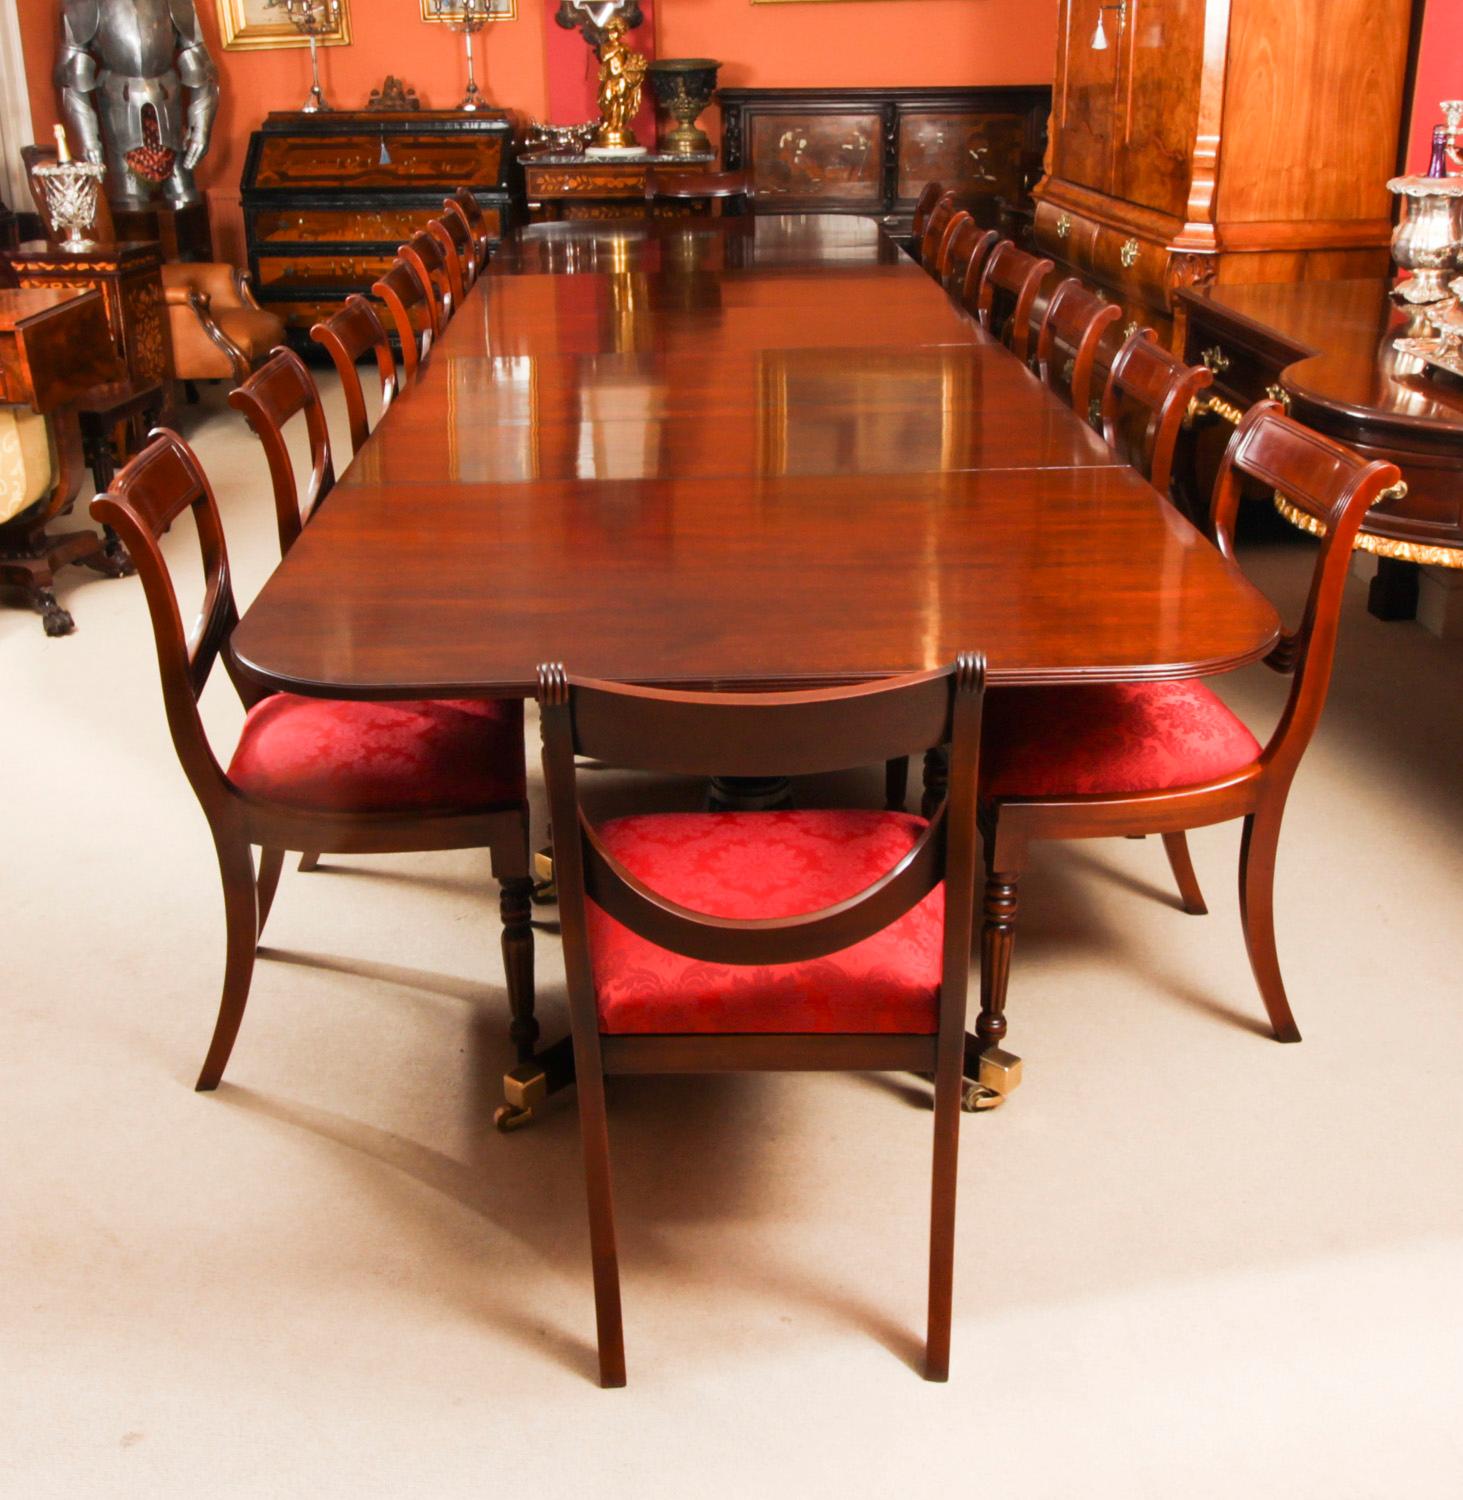 This is a fabulous Vintage dining set comprising a Regency Revival dining table by William Tillman and a set of sixteen swag back dining chairs, Circa 1980 in date.

The table is made of stunning solid flame mahogany and is raised on four 